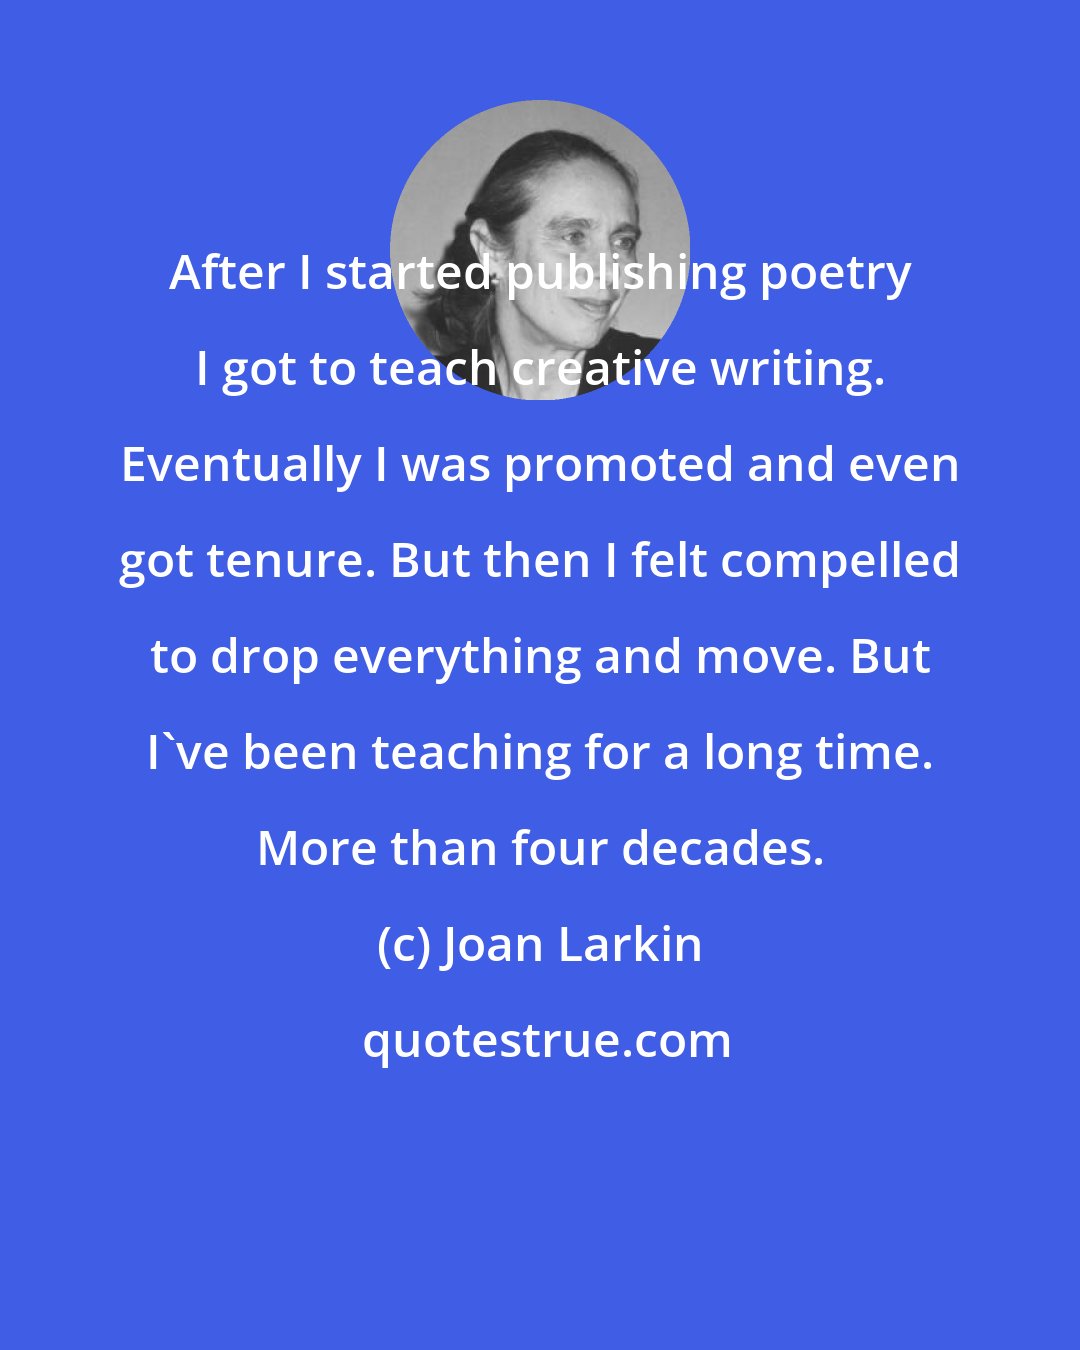 Joan Larkin: After I started publishing poetry I got to teach creative writing. Eventually I was promoted and even got tenure. But then I felt compelled to drop everything and move. But I've been teaching for a long time. More than four decades.